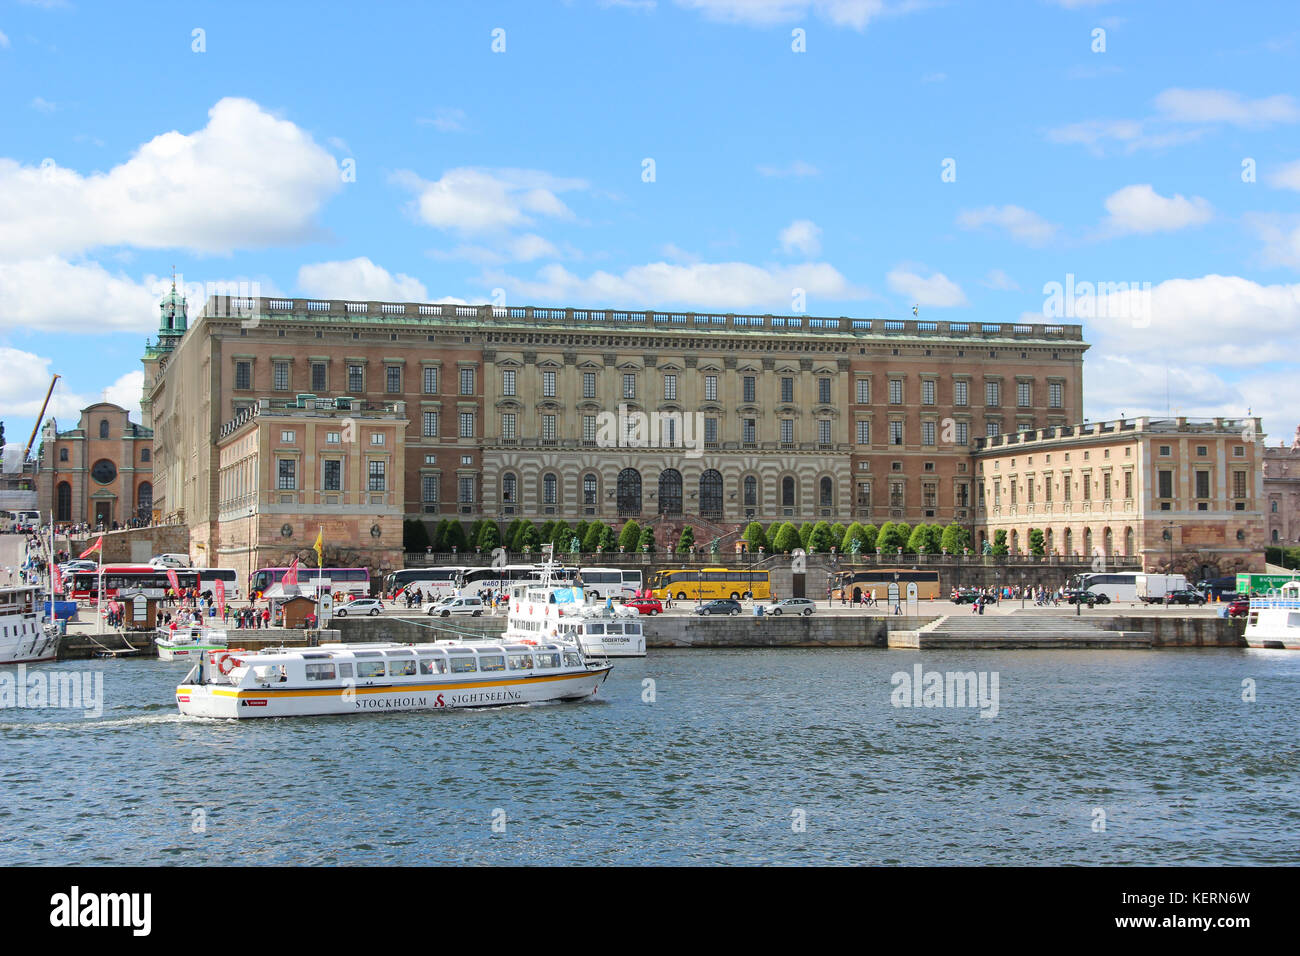 Stockholm Royal Palace is official residence and major royal palace of Swedish monarch. Stadsholmen in Gamla Stan. Offices of King are located here Stock Photo